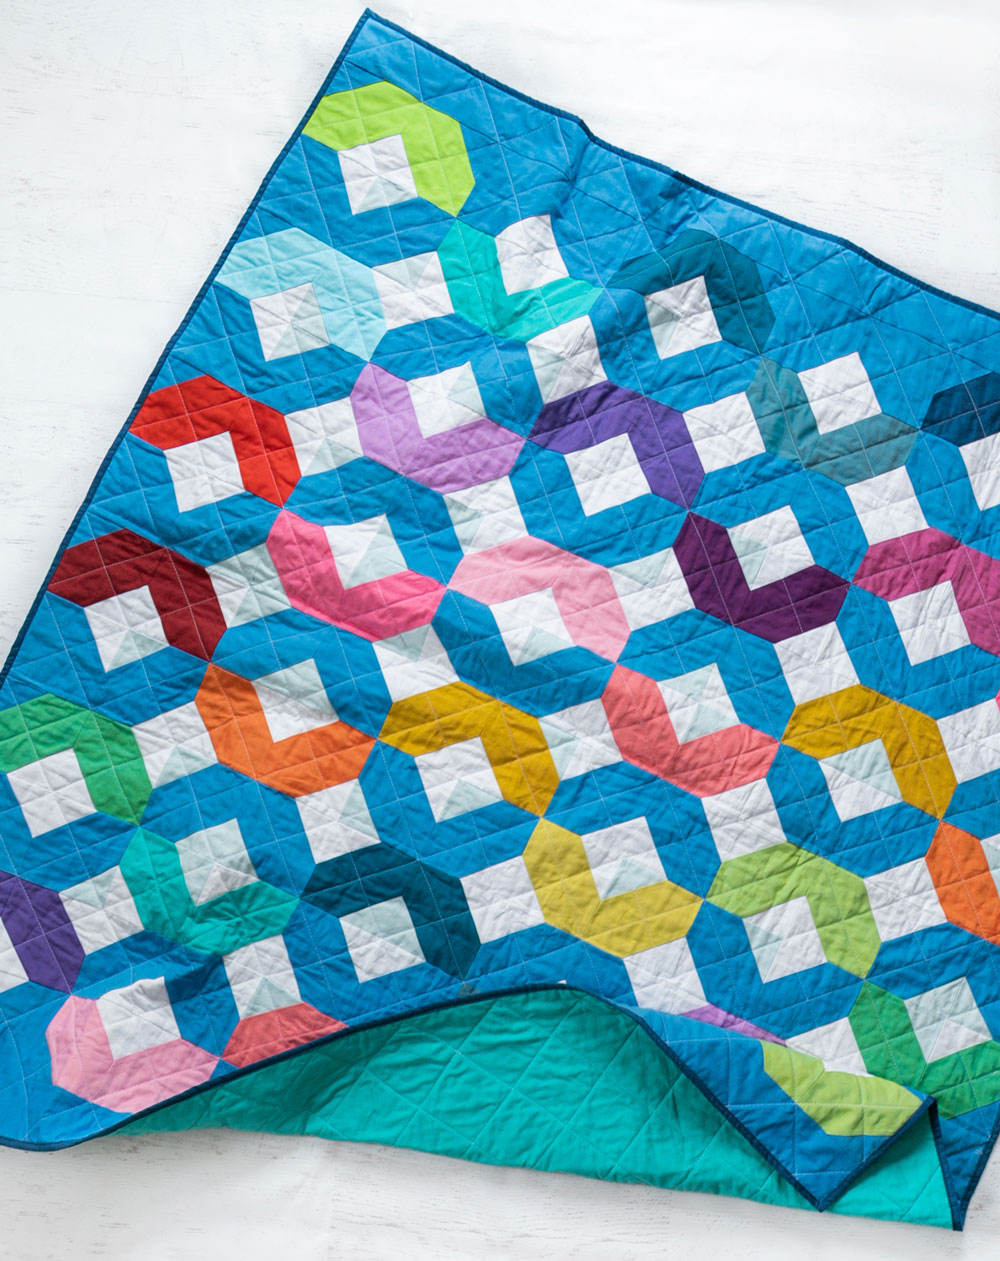 Make a Rainbow Quilt using this simple alteration to the Glitter & Glow quilt pattern. This is fat quarter friendly and great for newbie quilters and beginners. suzyquilts.com #rainbowquilt